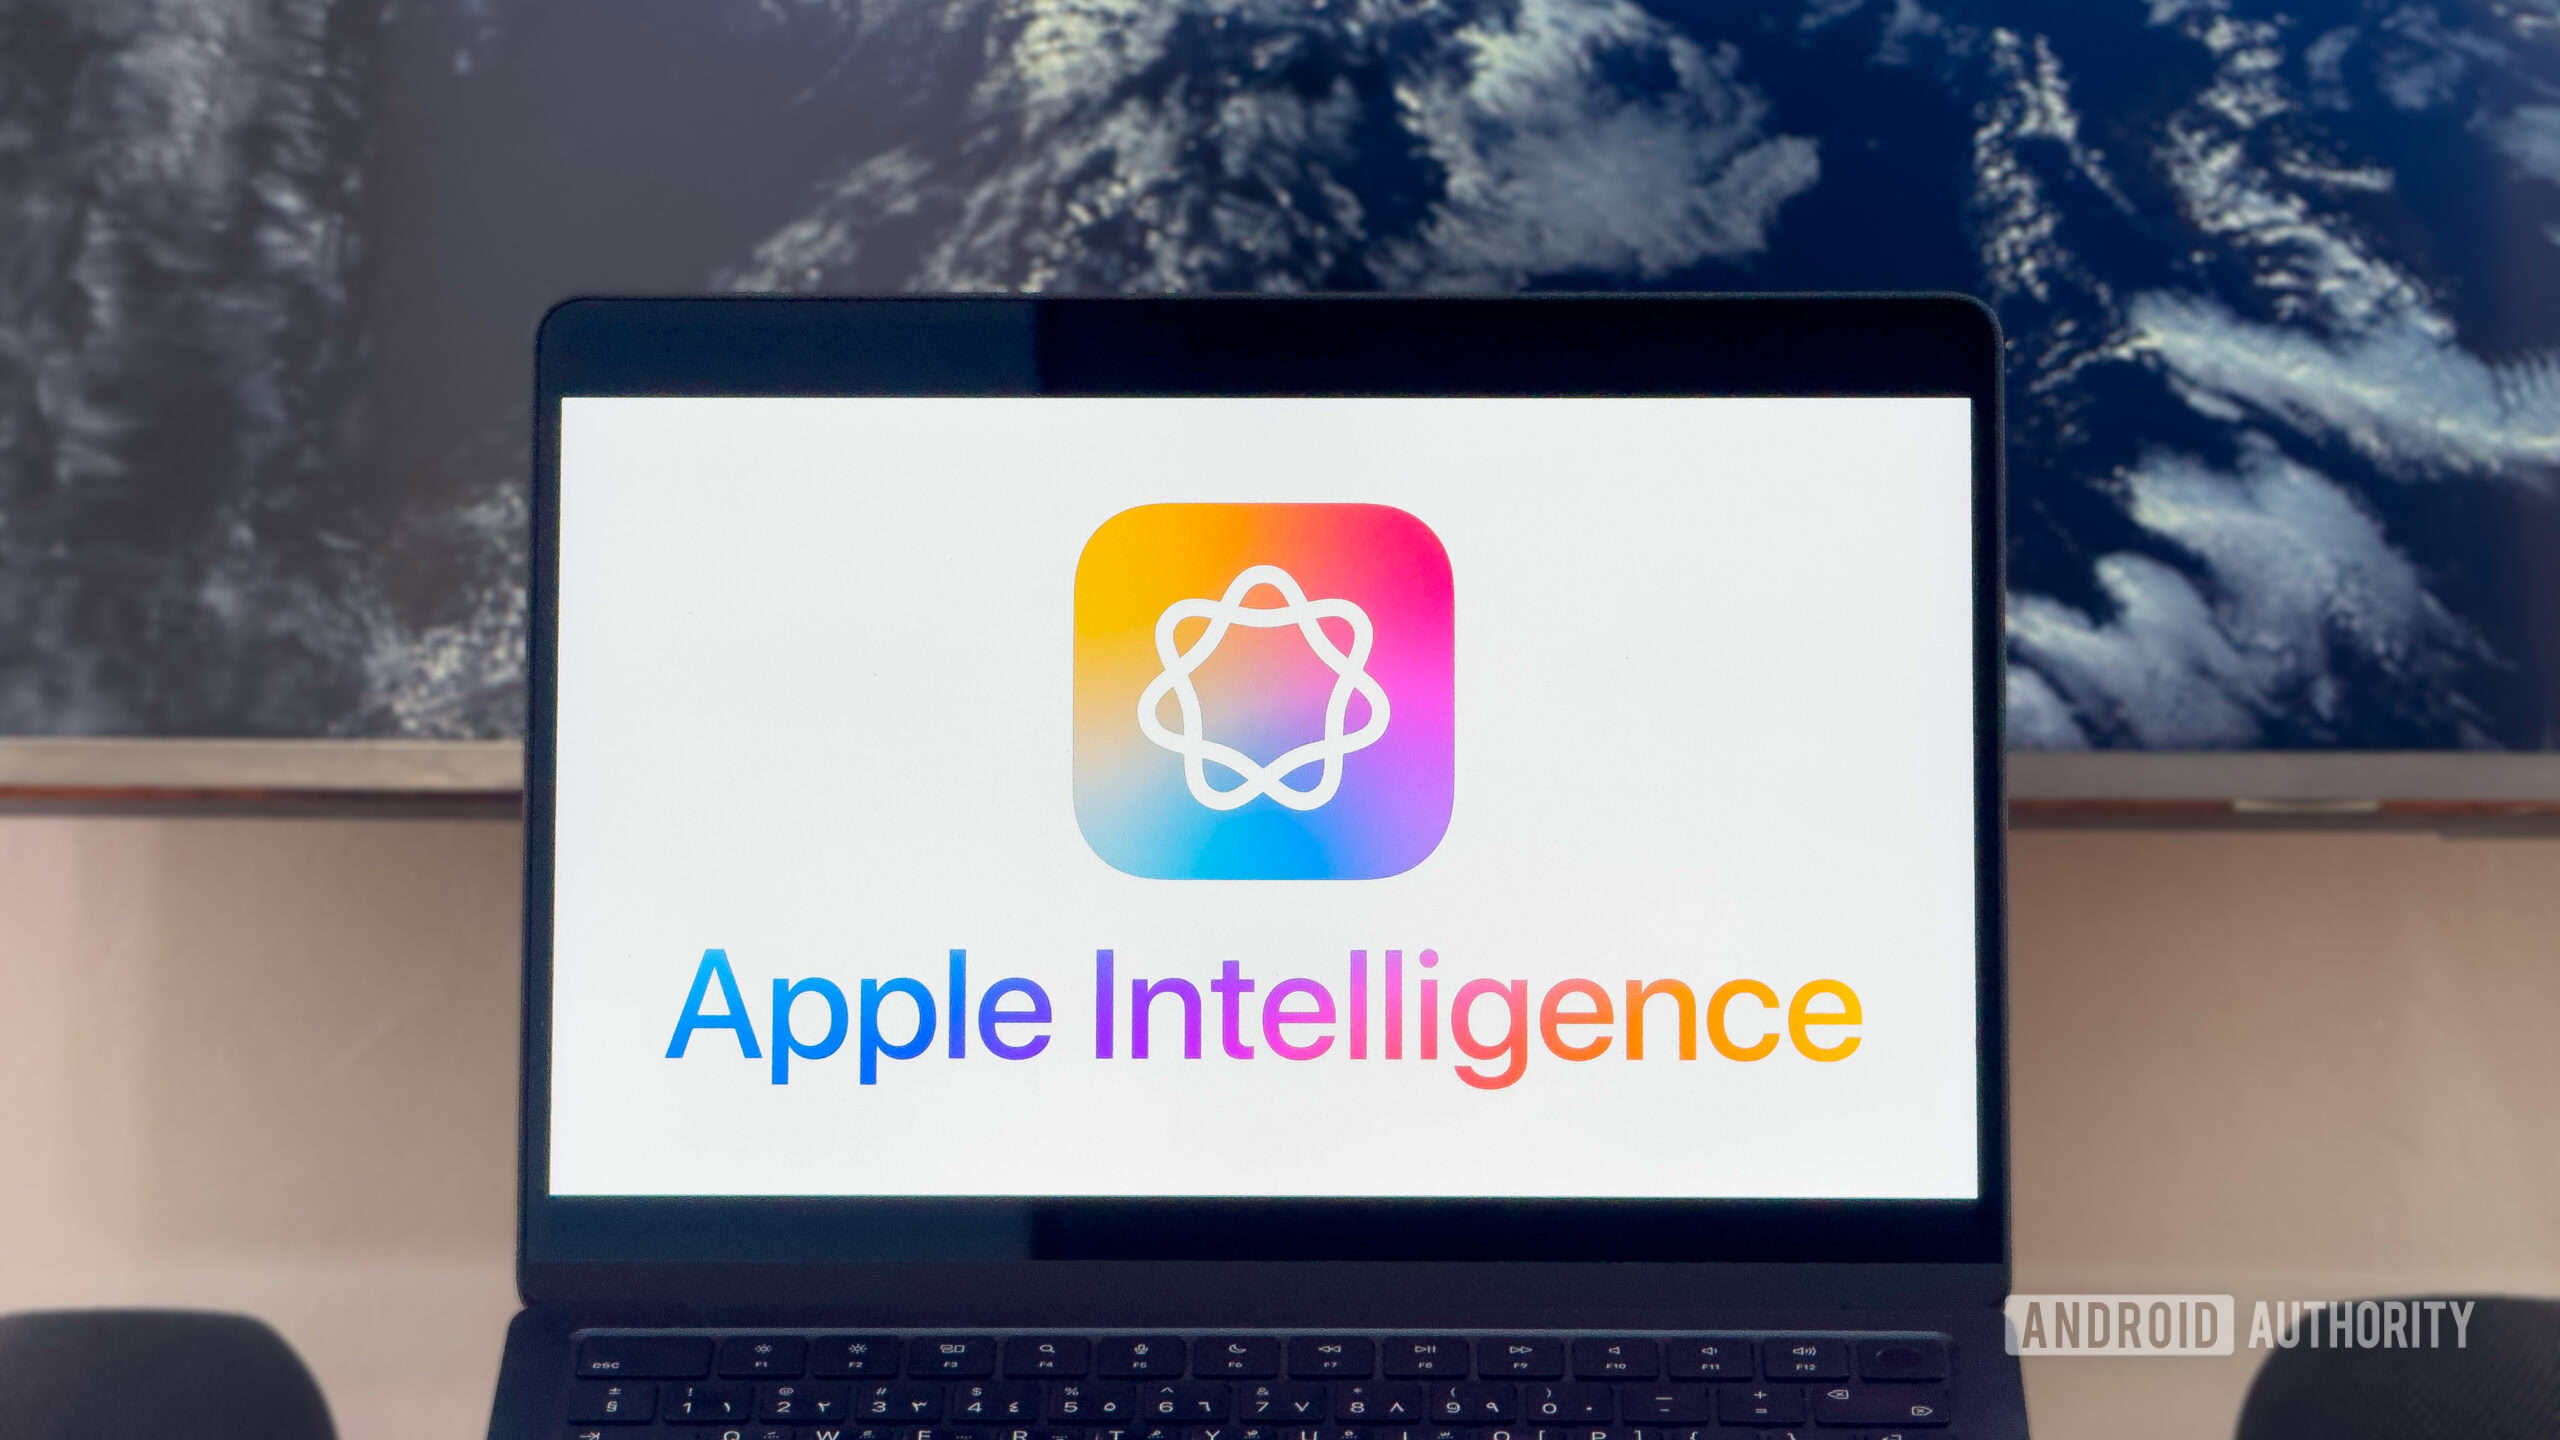 Apple Intelligence is falling for phishing emails, and that could cost iPhone users